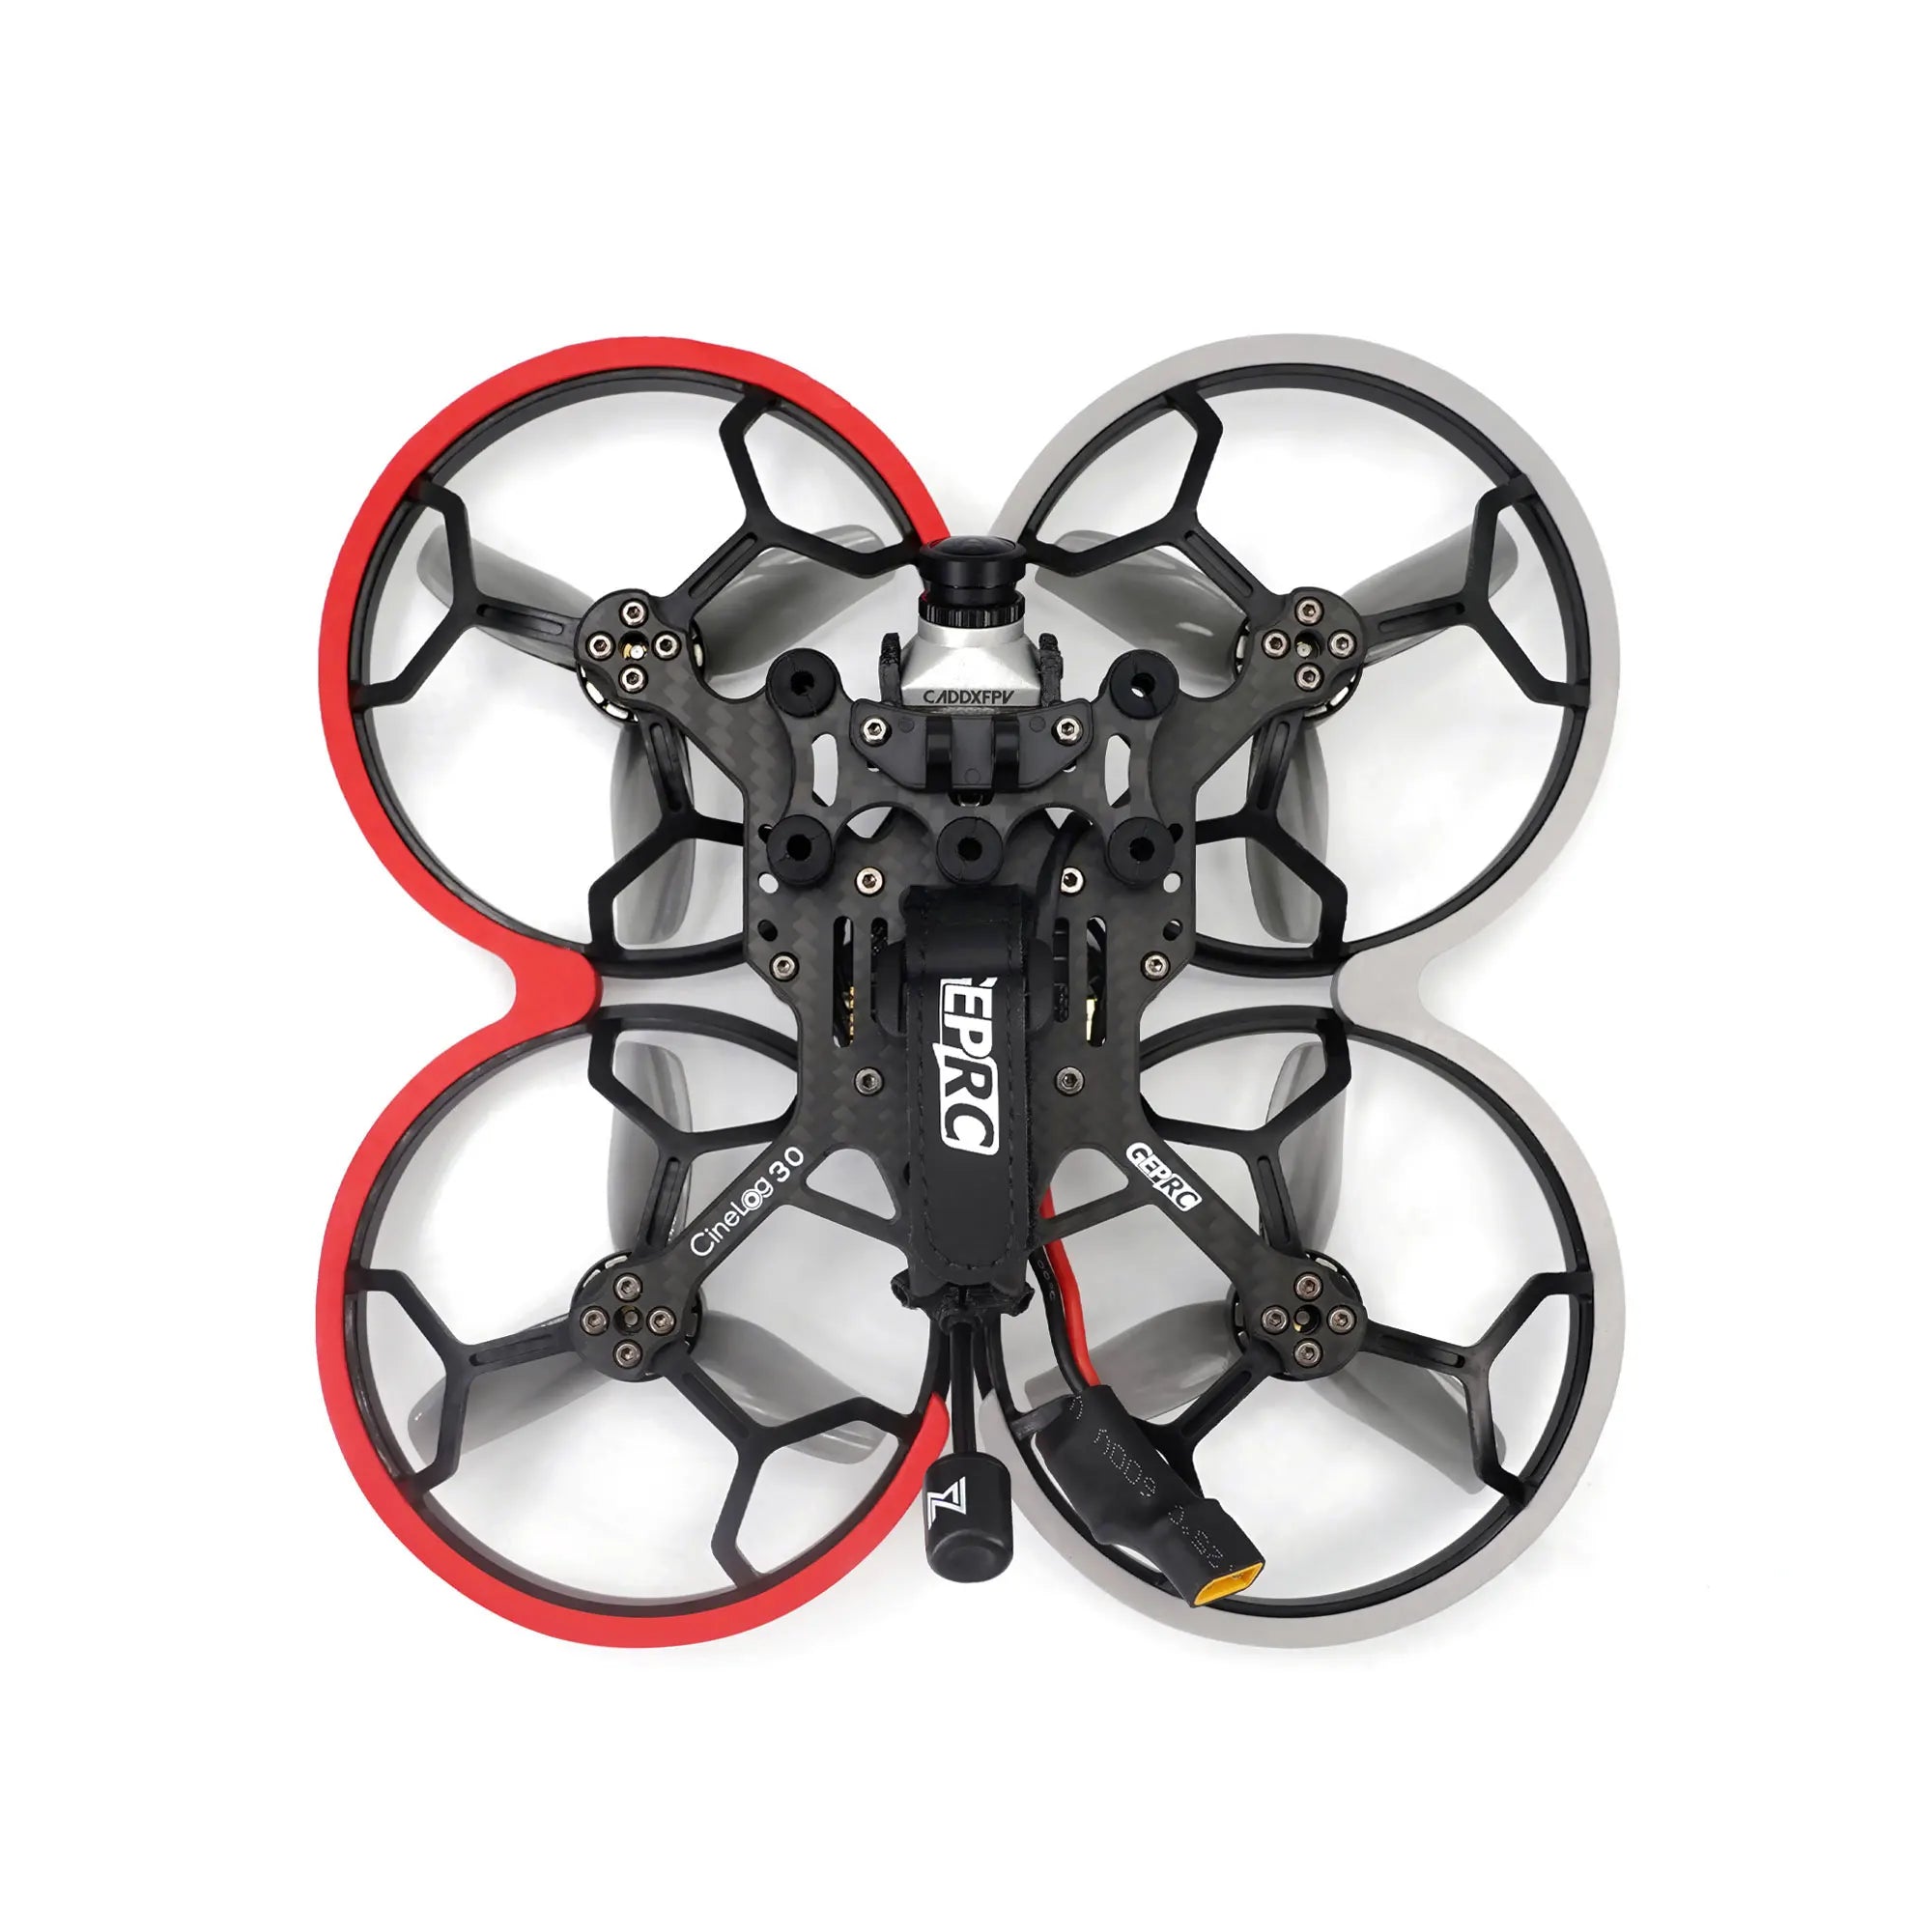 GEPRC CineLog30 HD FPV, Crashes or fire damage caused by non-manufacturing factors, including pilot errors 